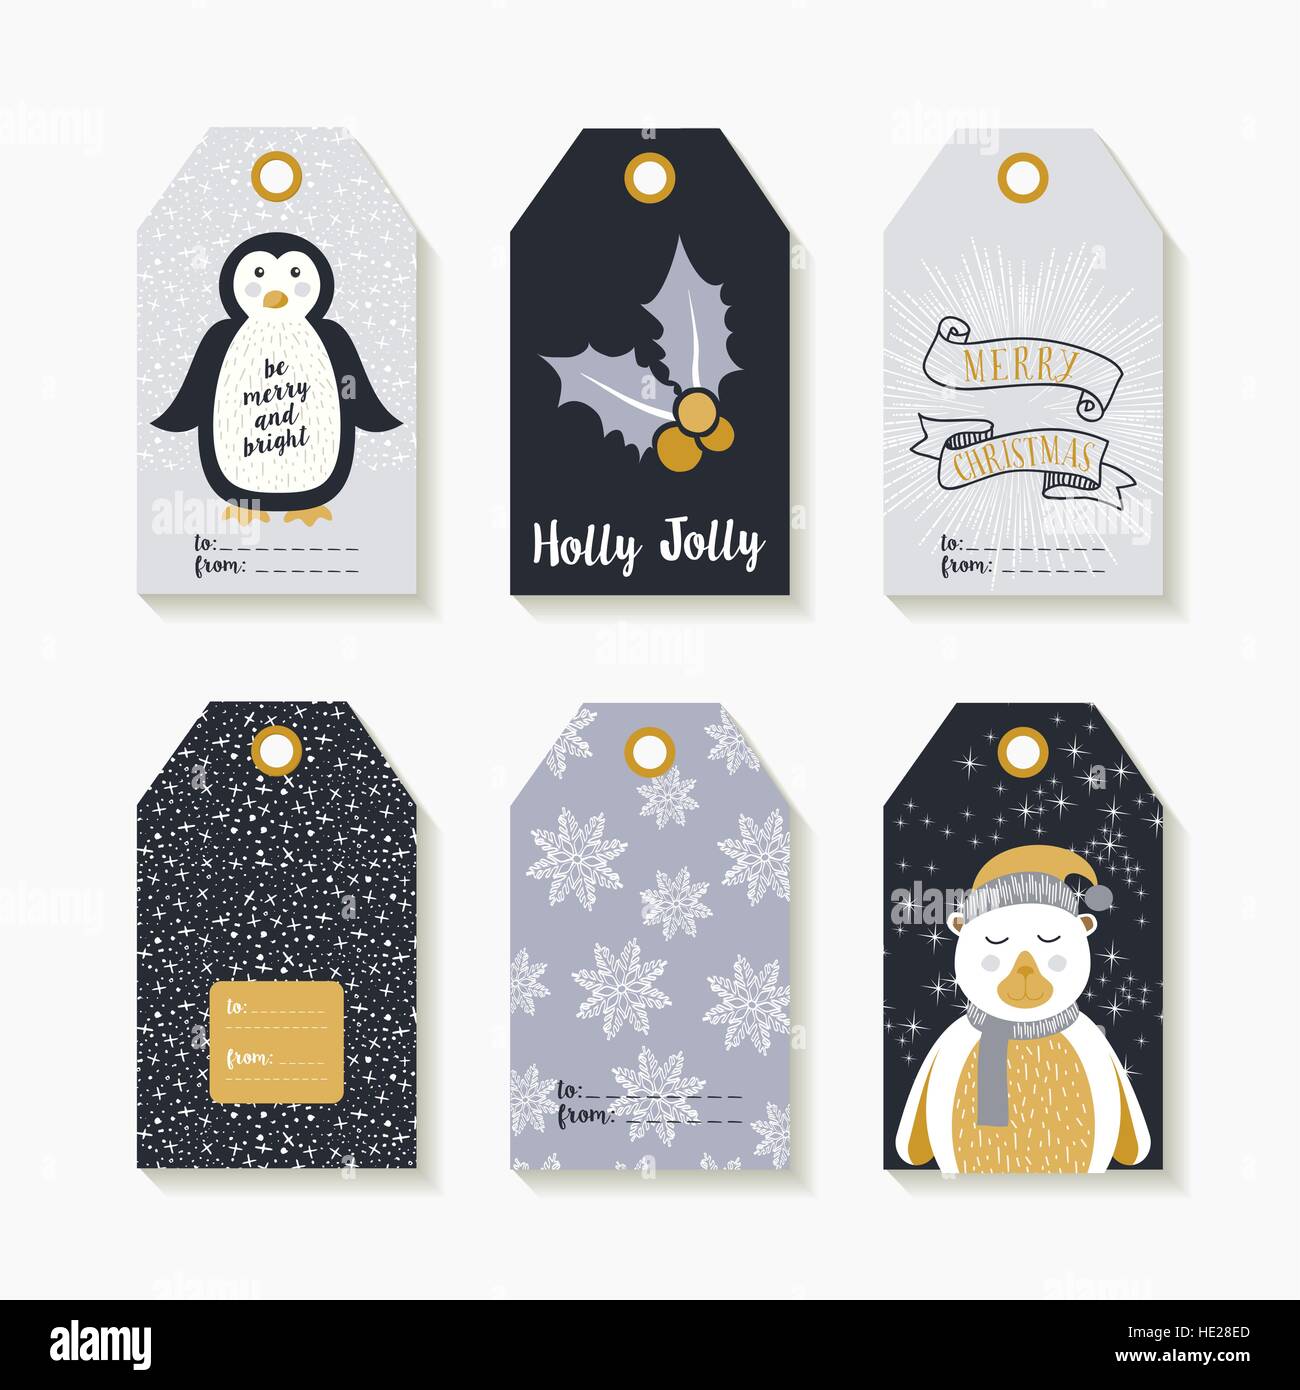 Christmas set of labels and tags in vintage style. Illustrations of cute animals and winter decoration. EPS10 vector. Stock Vector